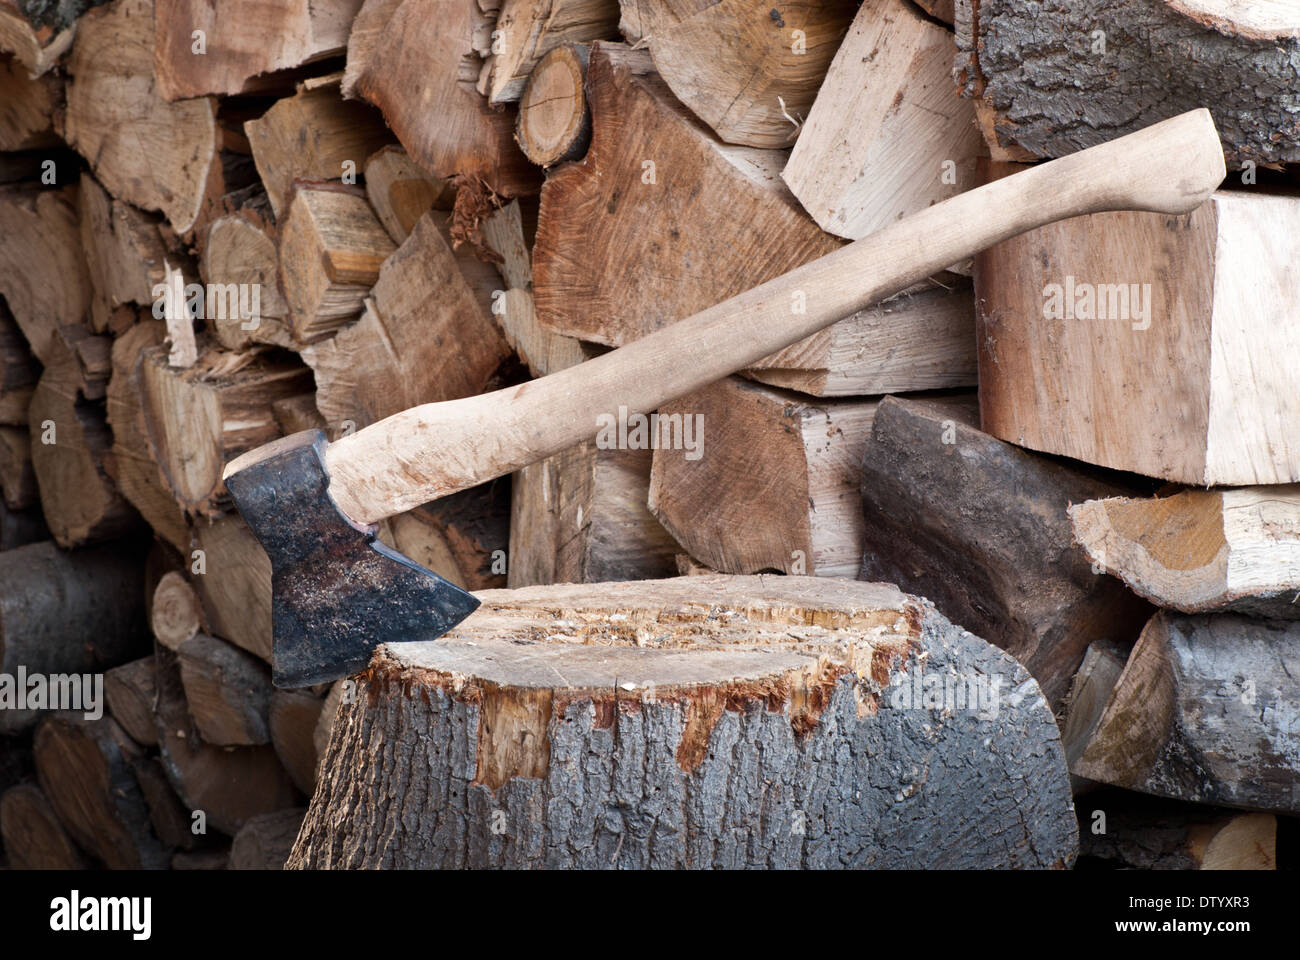 a big old ax with fire wood Stock Photo